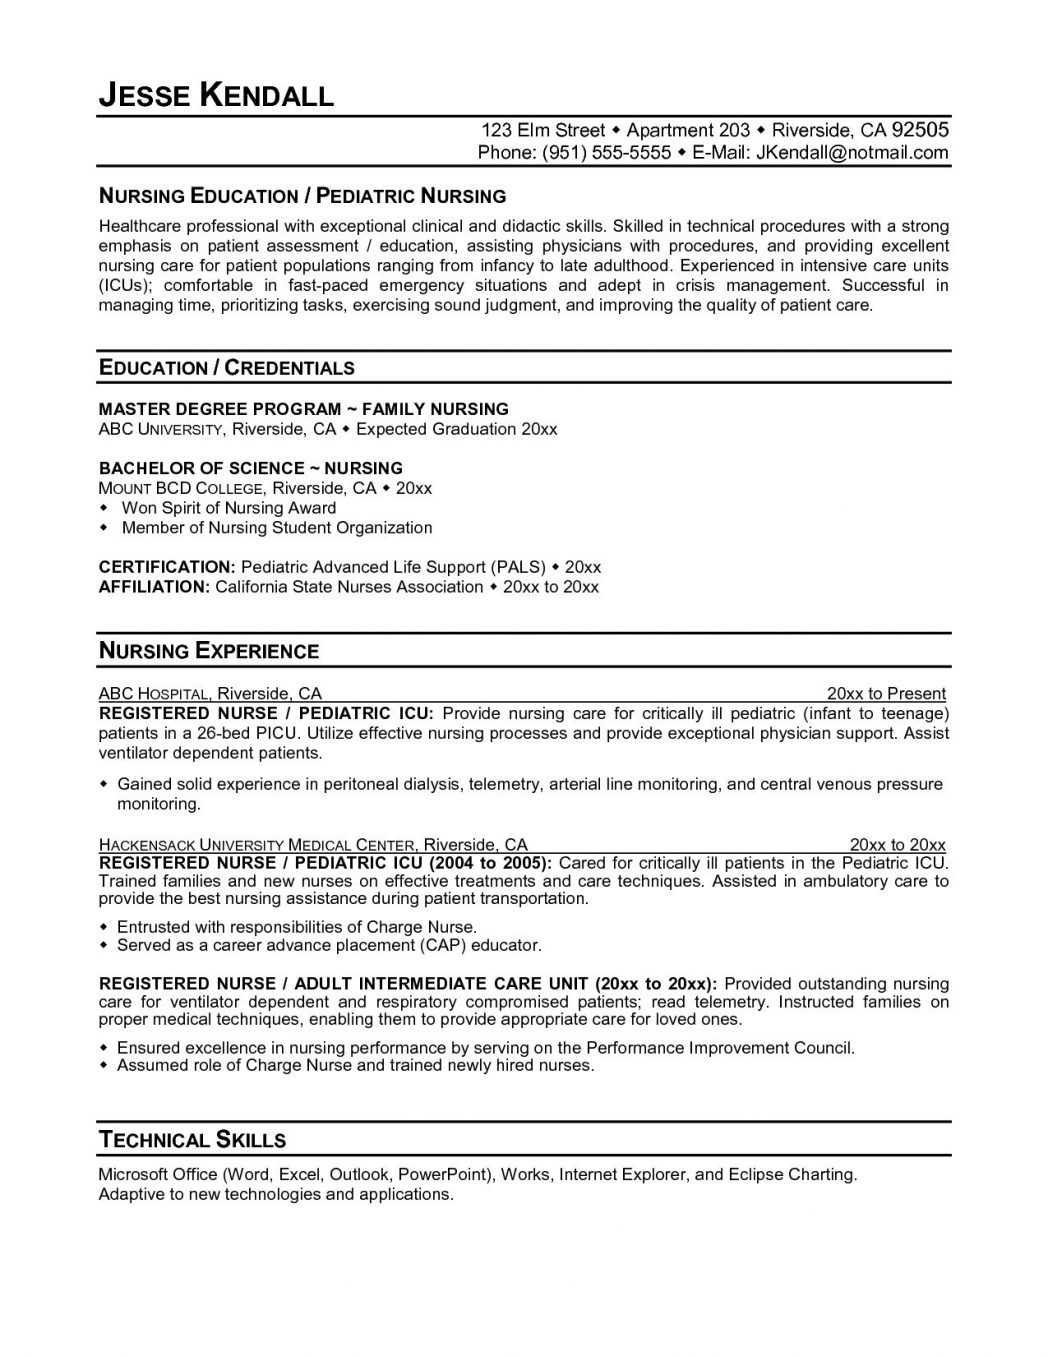 Nurse Cover Letter New Graduate Nursing Cover Letter Nurse Objective Examples Rn For Student Sample Grad Samples Practitioner Resumeplate Clinical Experience Manager Application As A Assistant Profes nurse cover letter|wikiresume.com